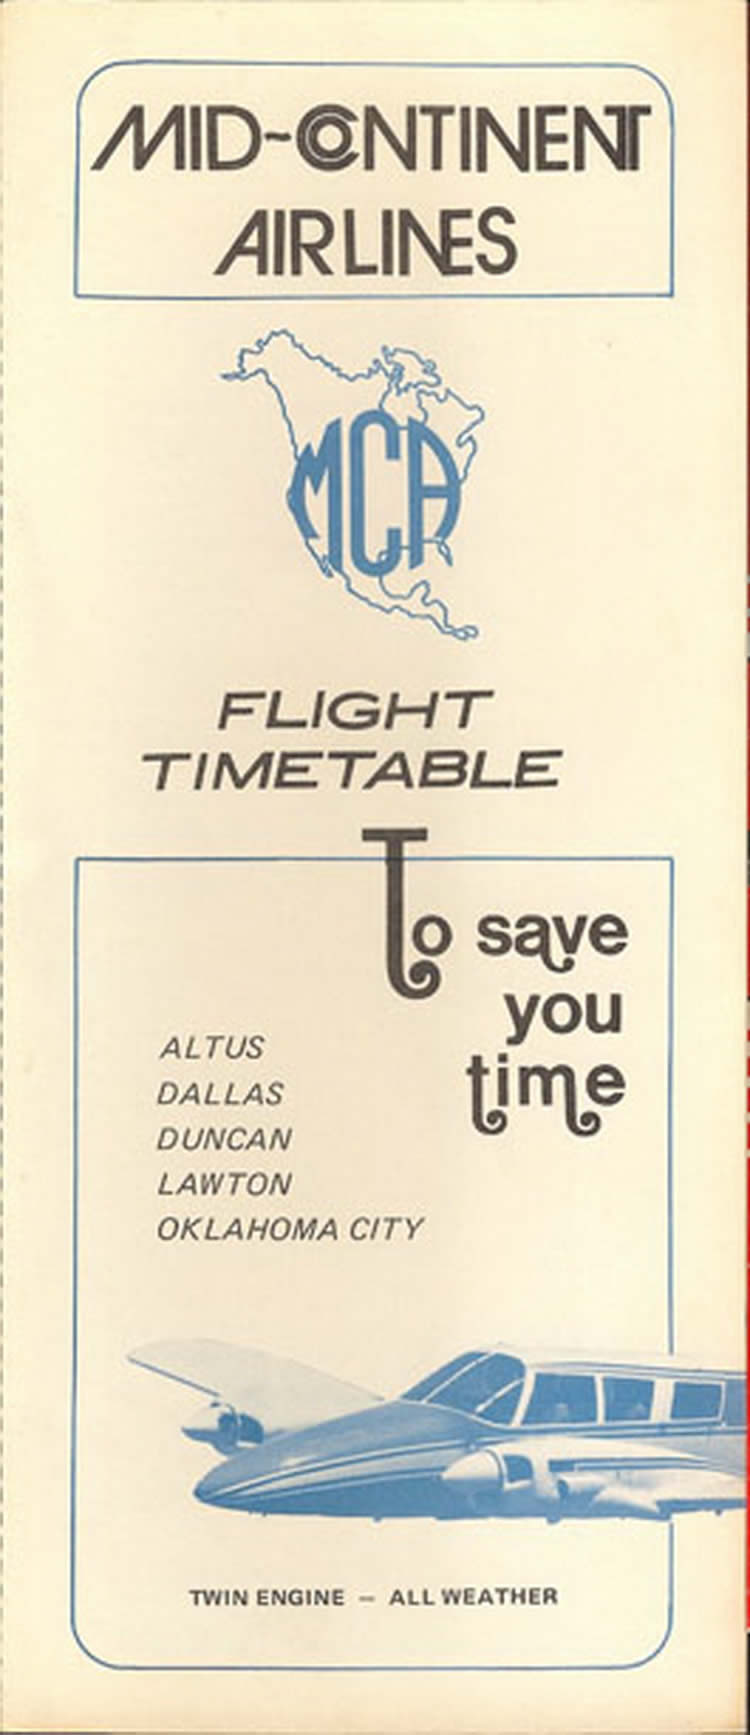 vintage airline timetable for Mid Continent Airlines